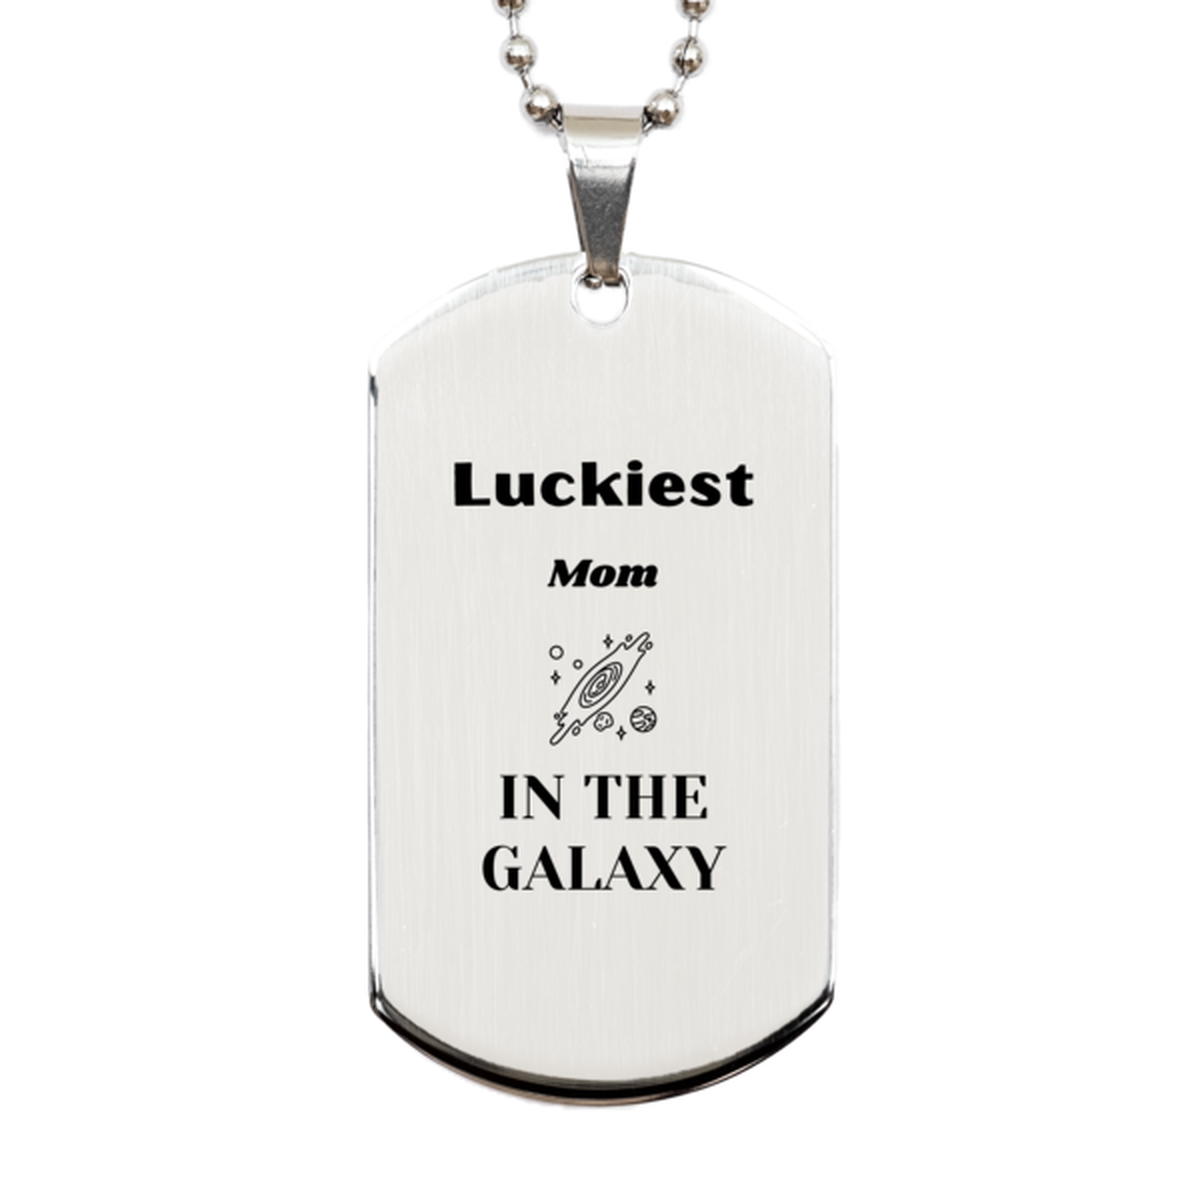 Luckiest Mom in the Galaxy, To My Mom Engraved Gifts, Christmas Mom Silver Dog Tag Gifts, X-mas Birthday Unique Gifts For Mom Men Women